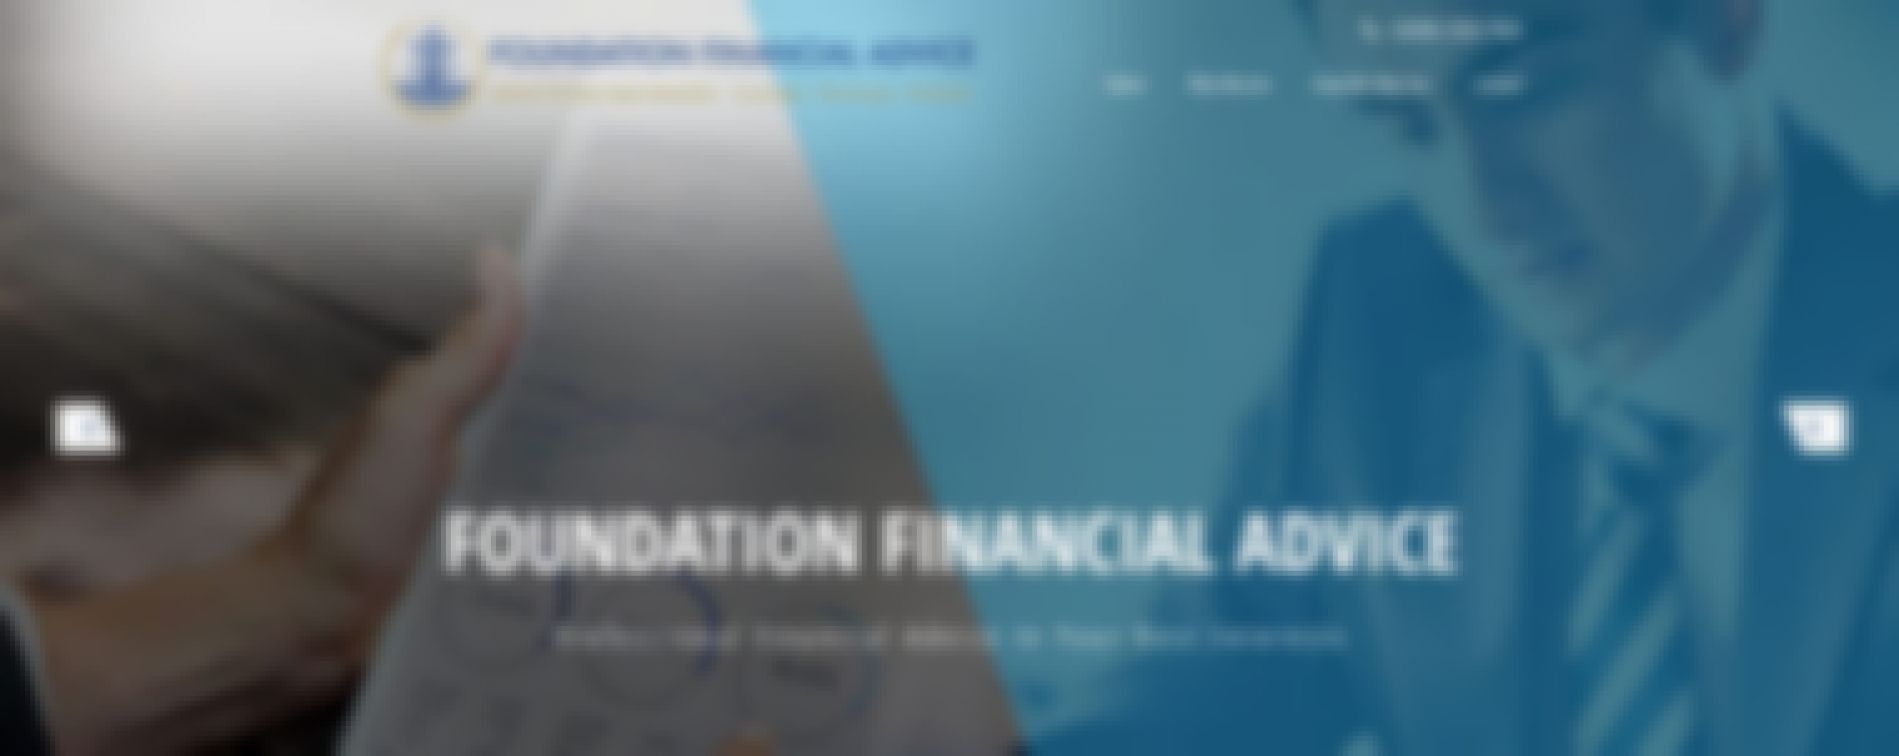 foundation financial advice financial planners & advisors melbourne